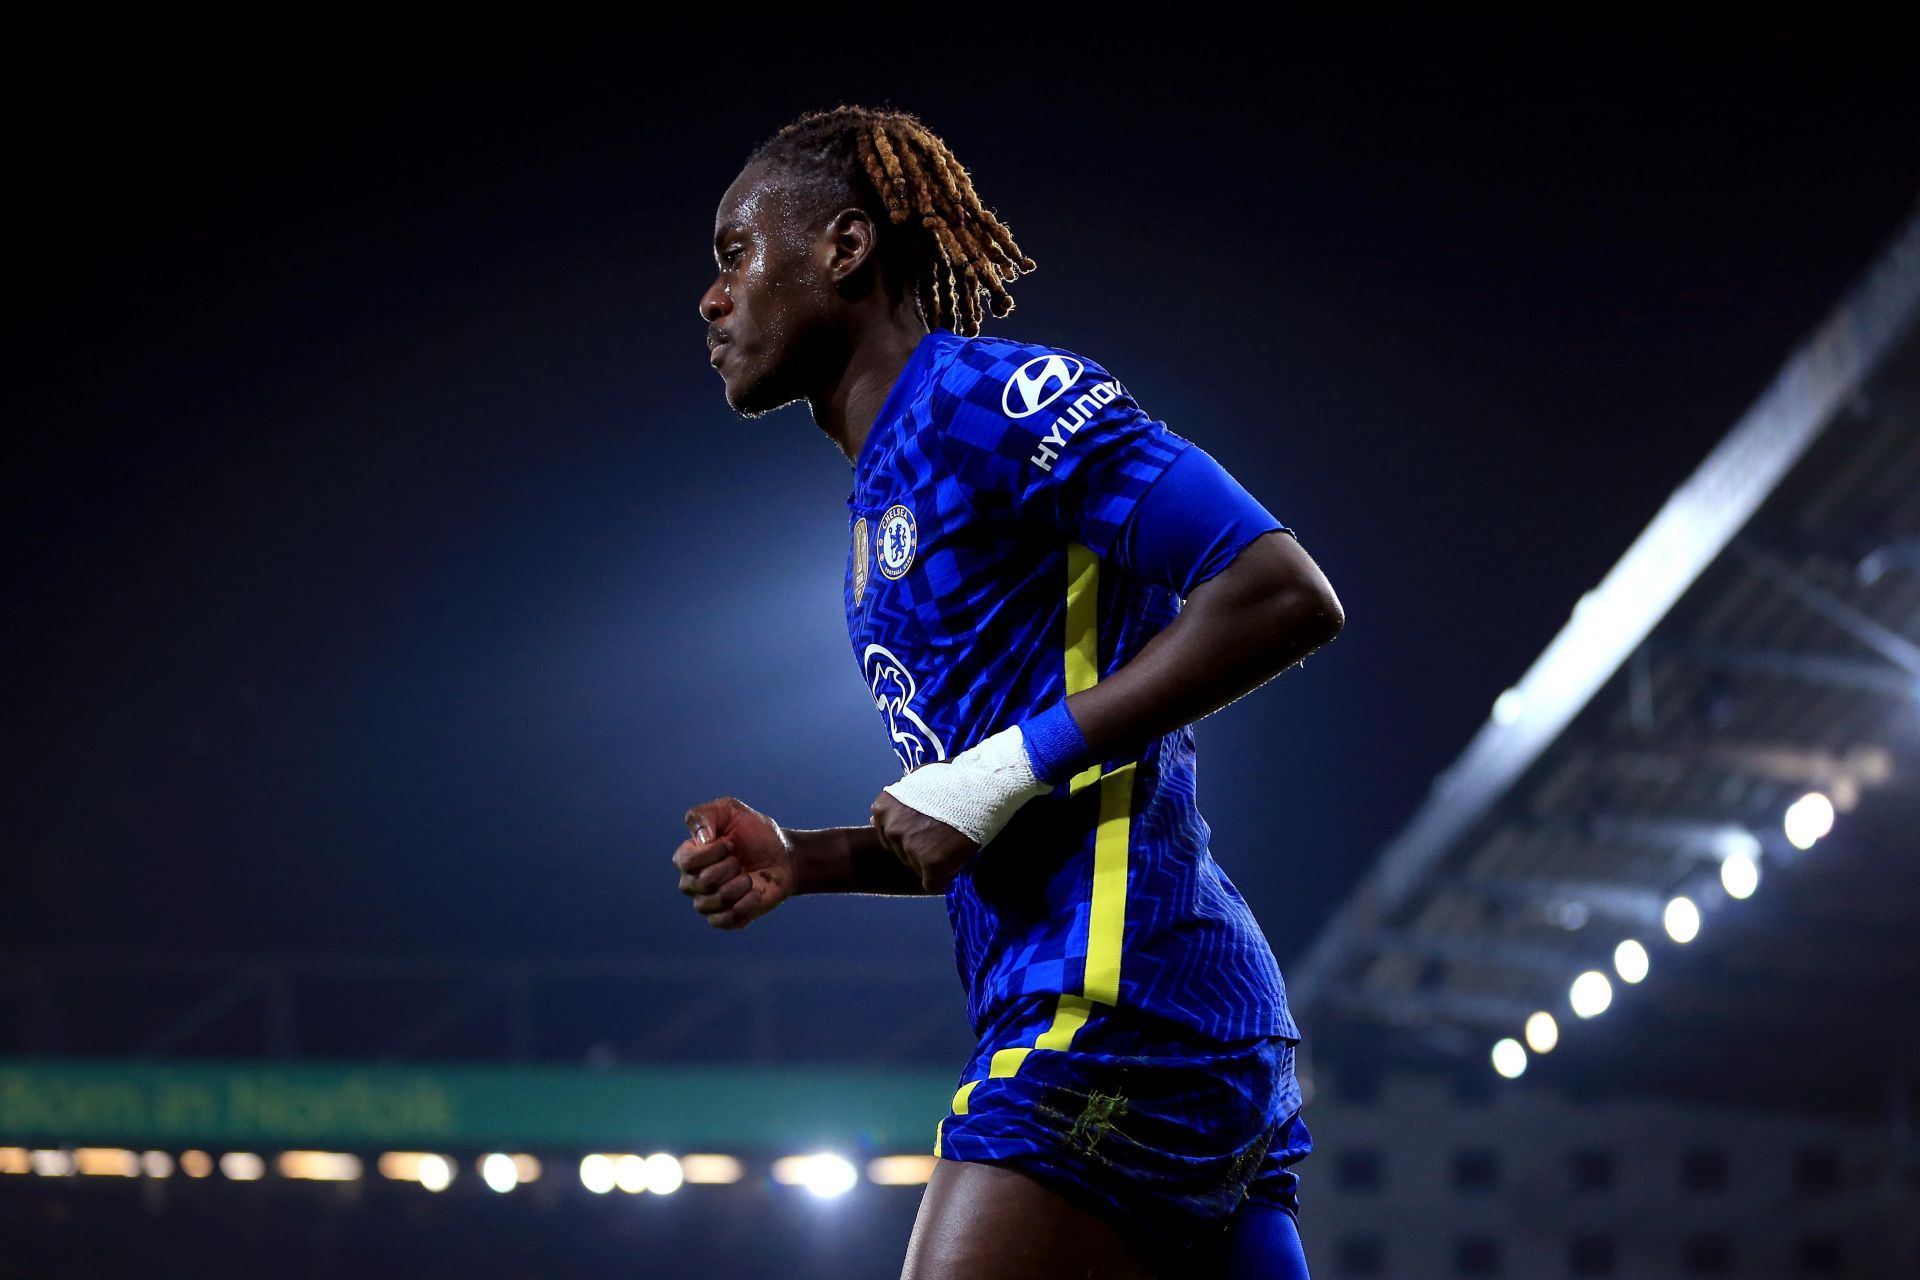 Chalobah scored four goals for the Blues last season